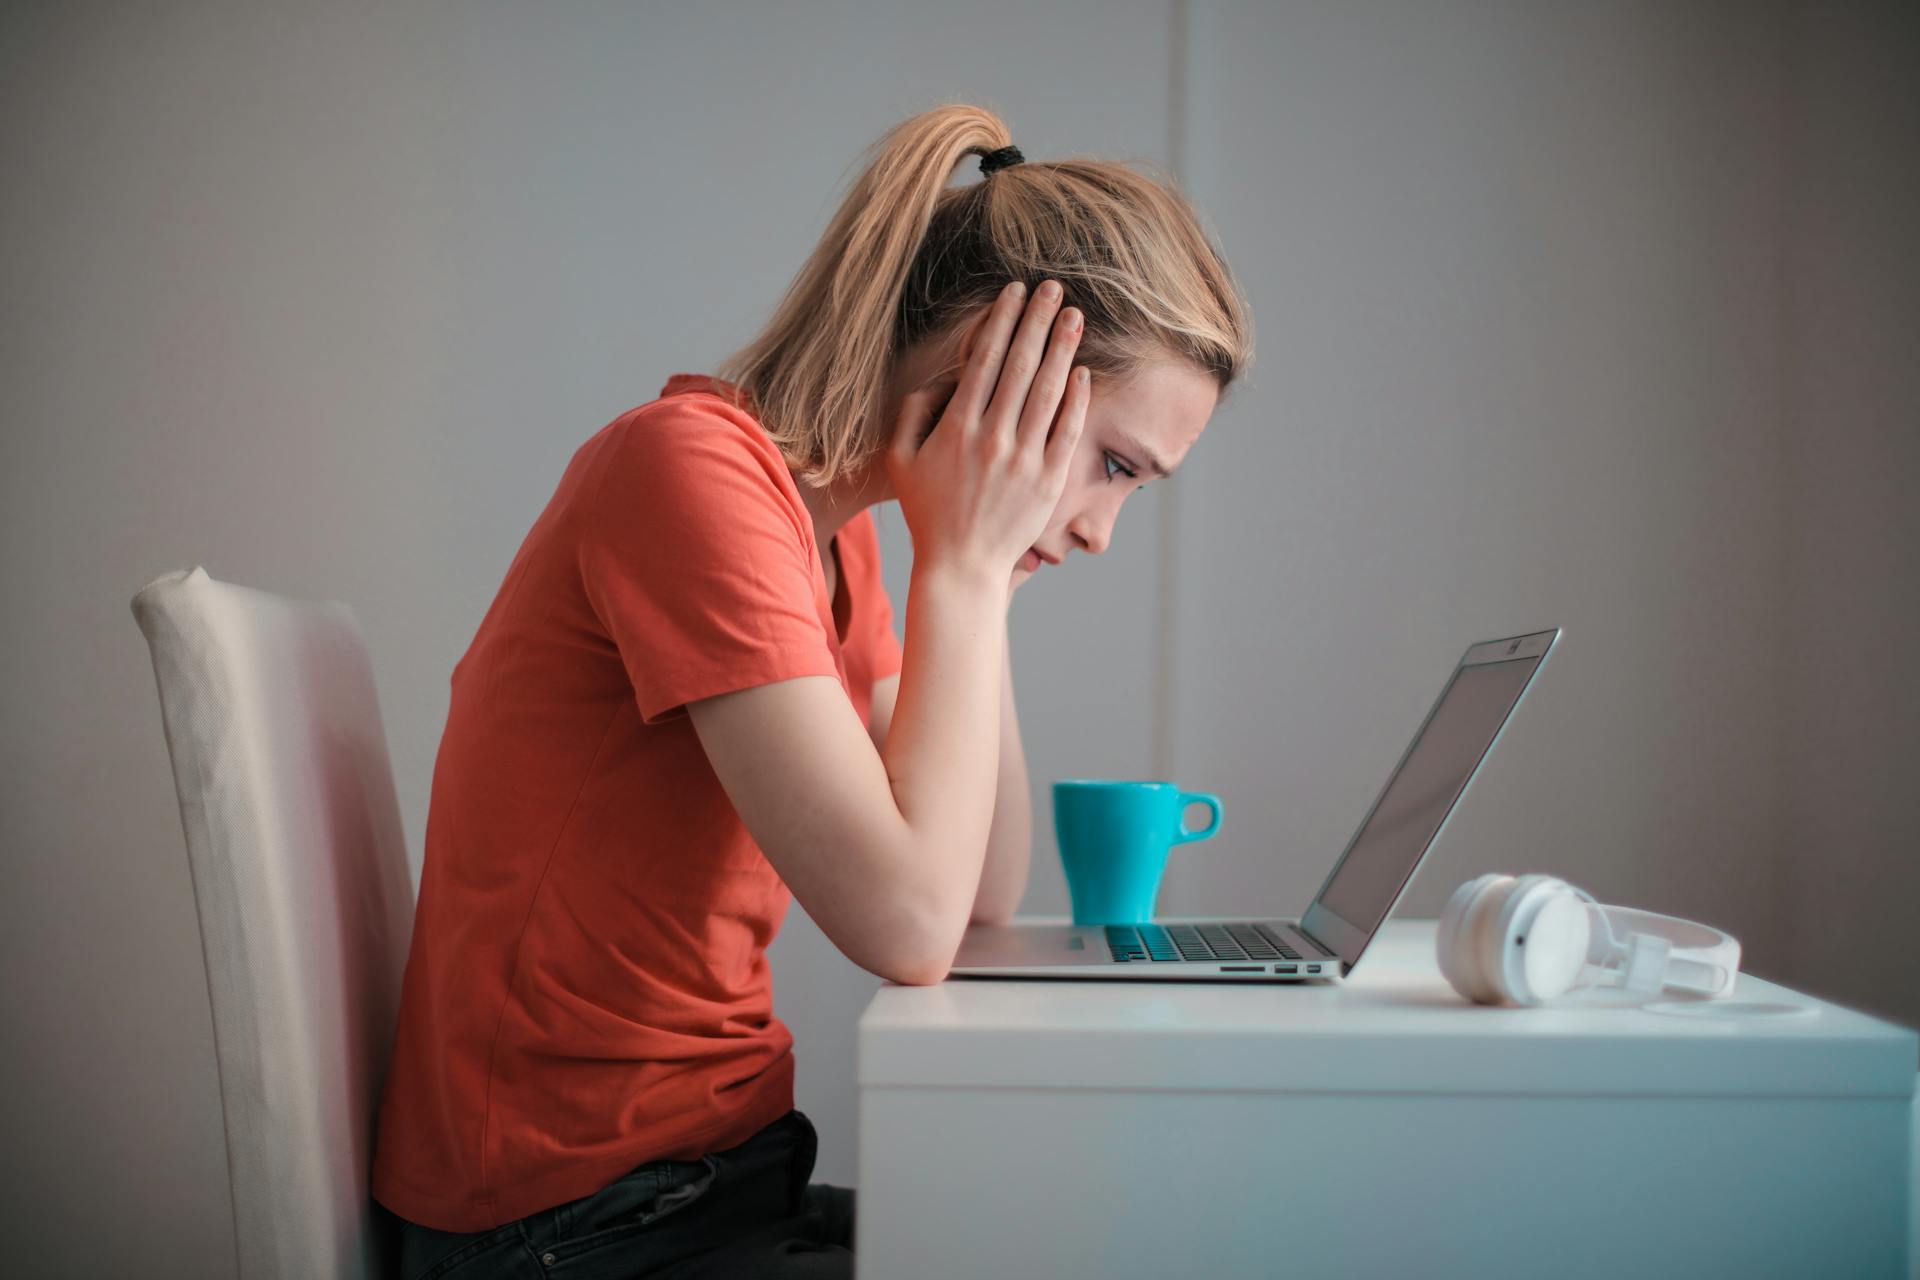 A woman looking at her laptop and holding her head | Source: Pexels